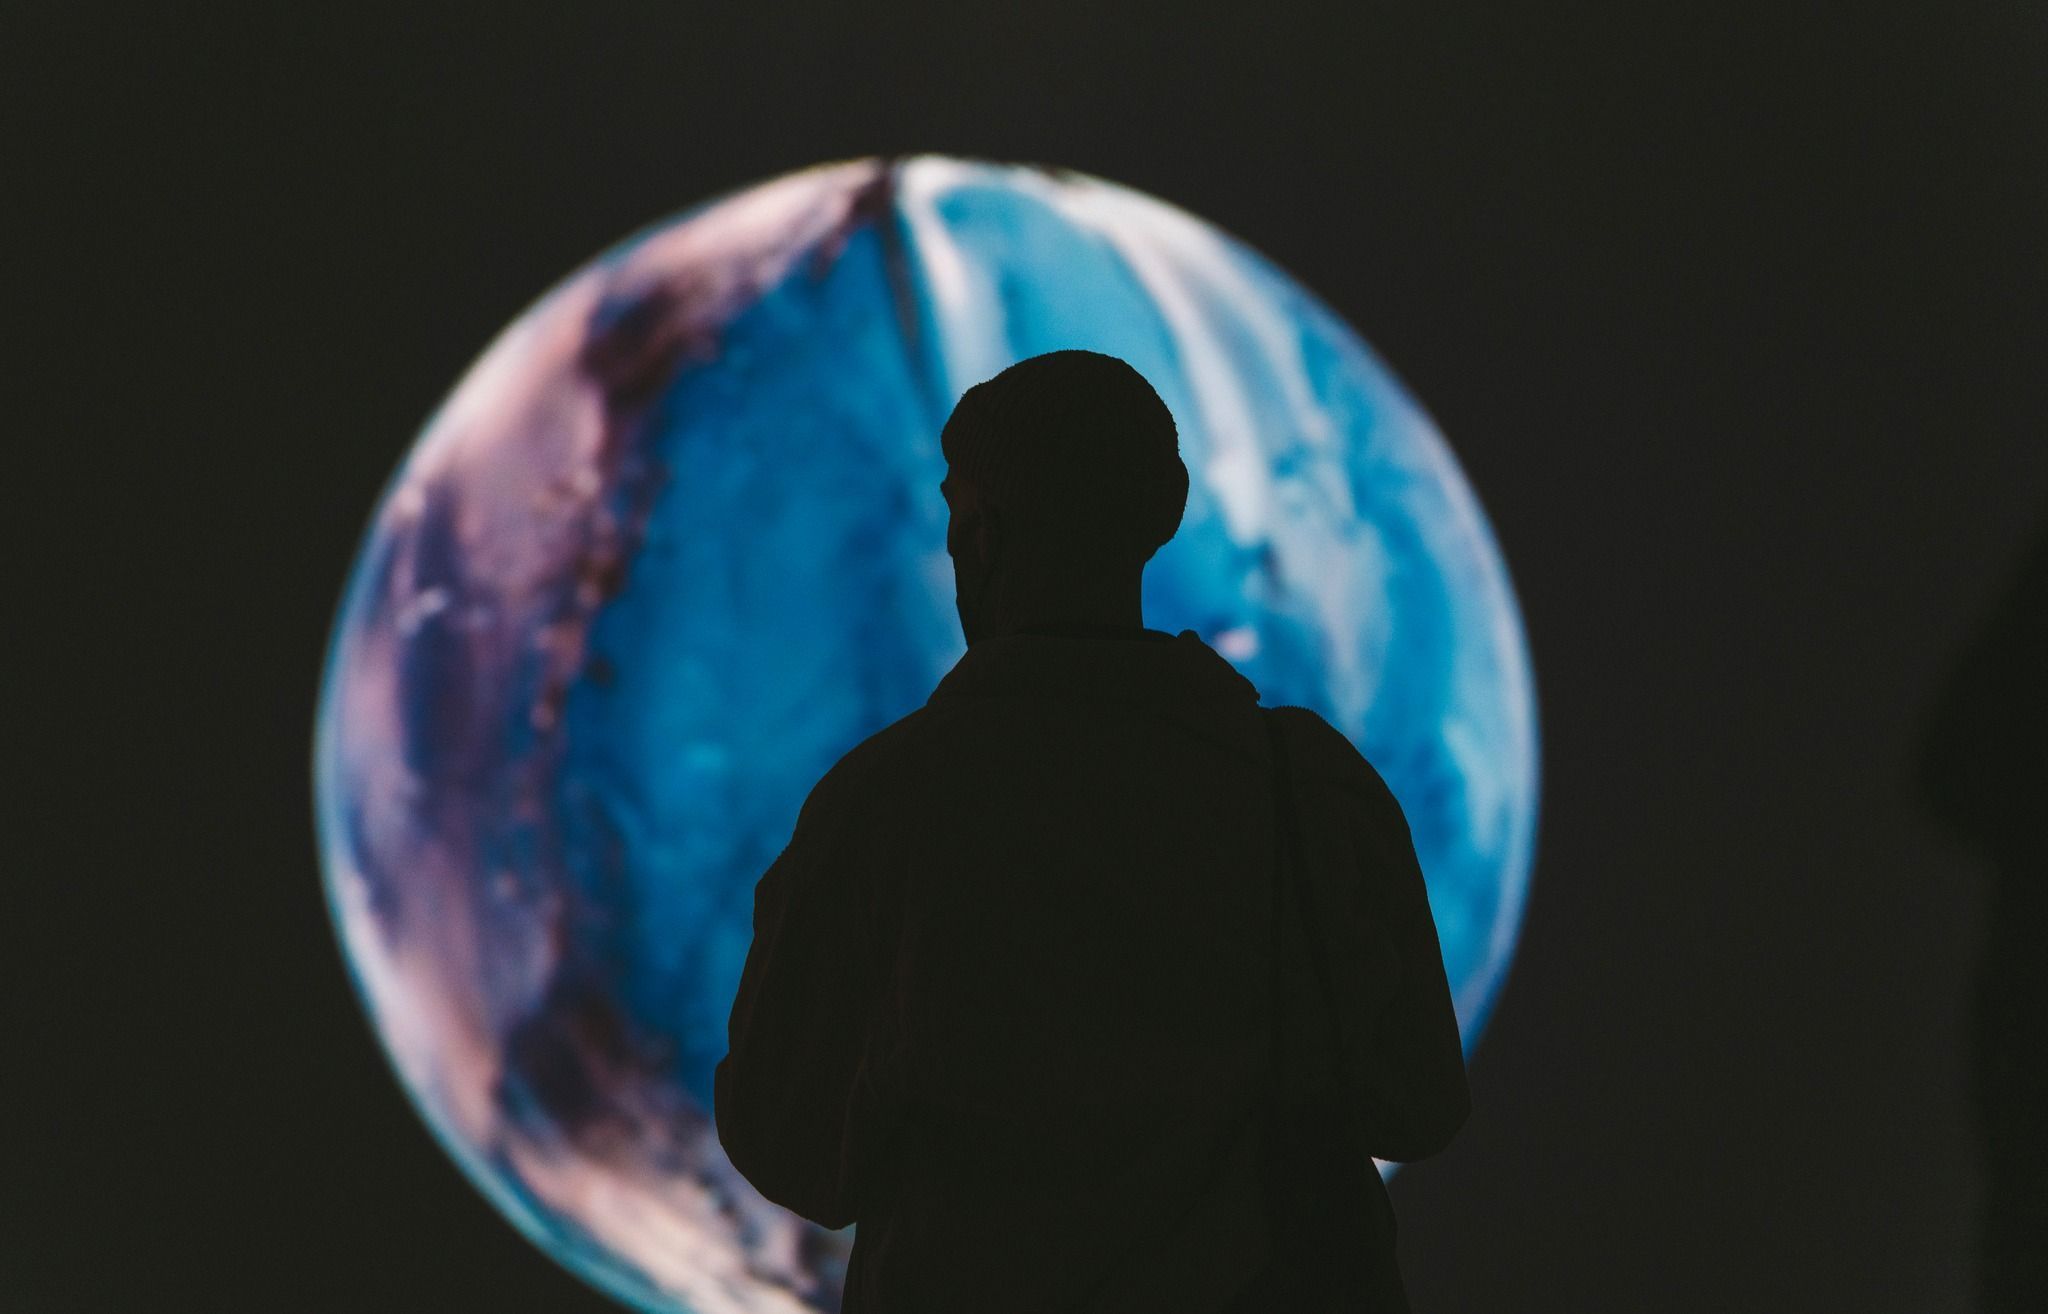 Photograph from the Distinct art exhibition. Background is black with a blue and purple sphere in the centre, and a person's sillhouette in front of the sphere